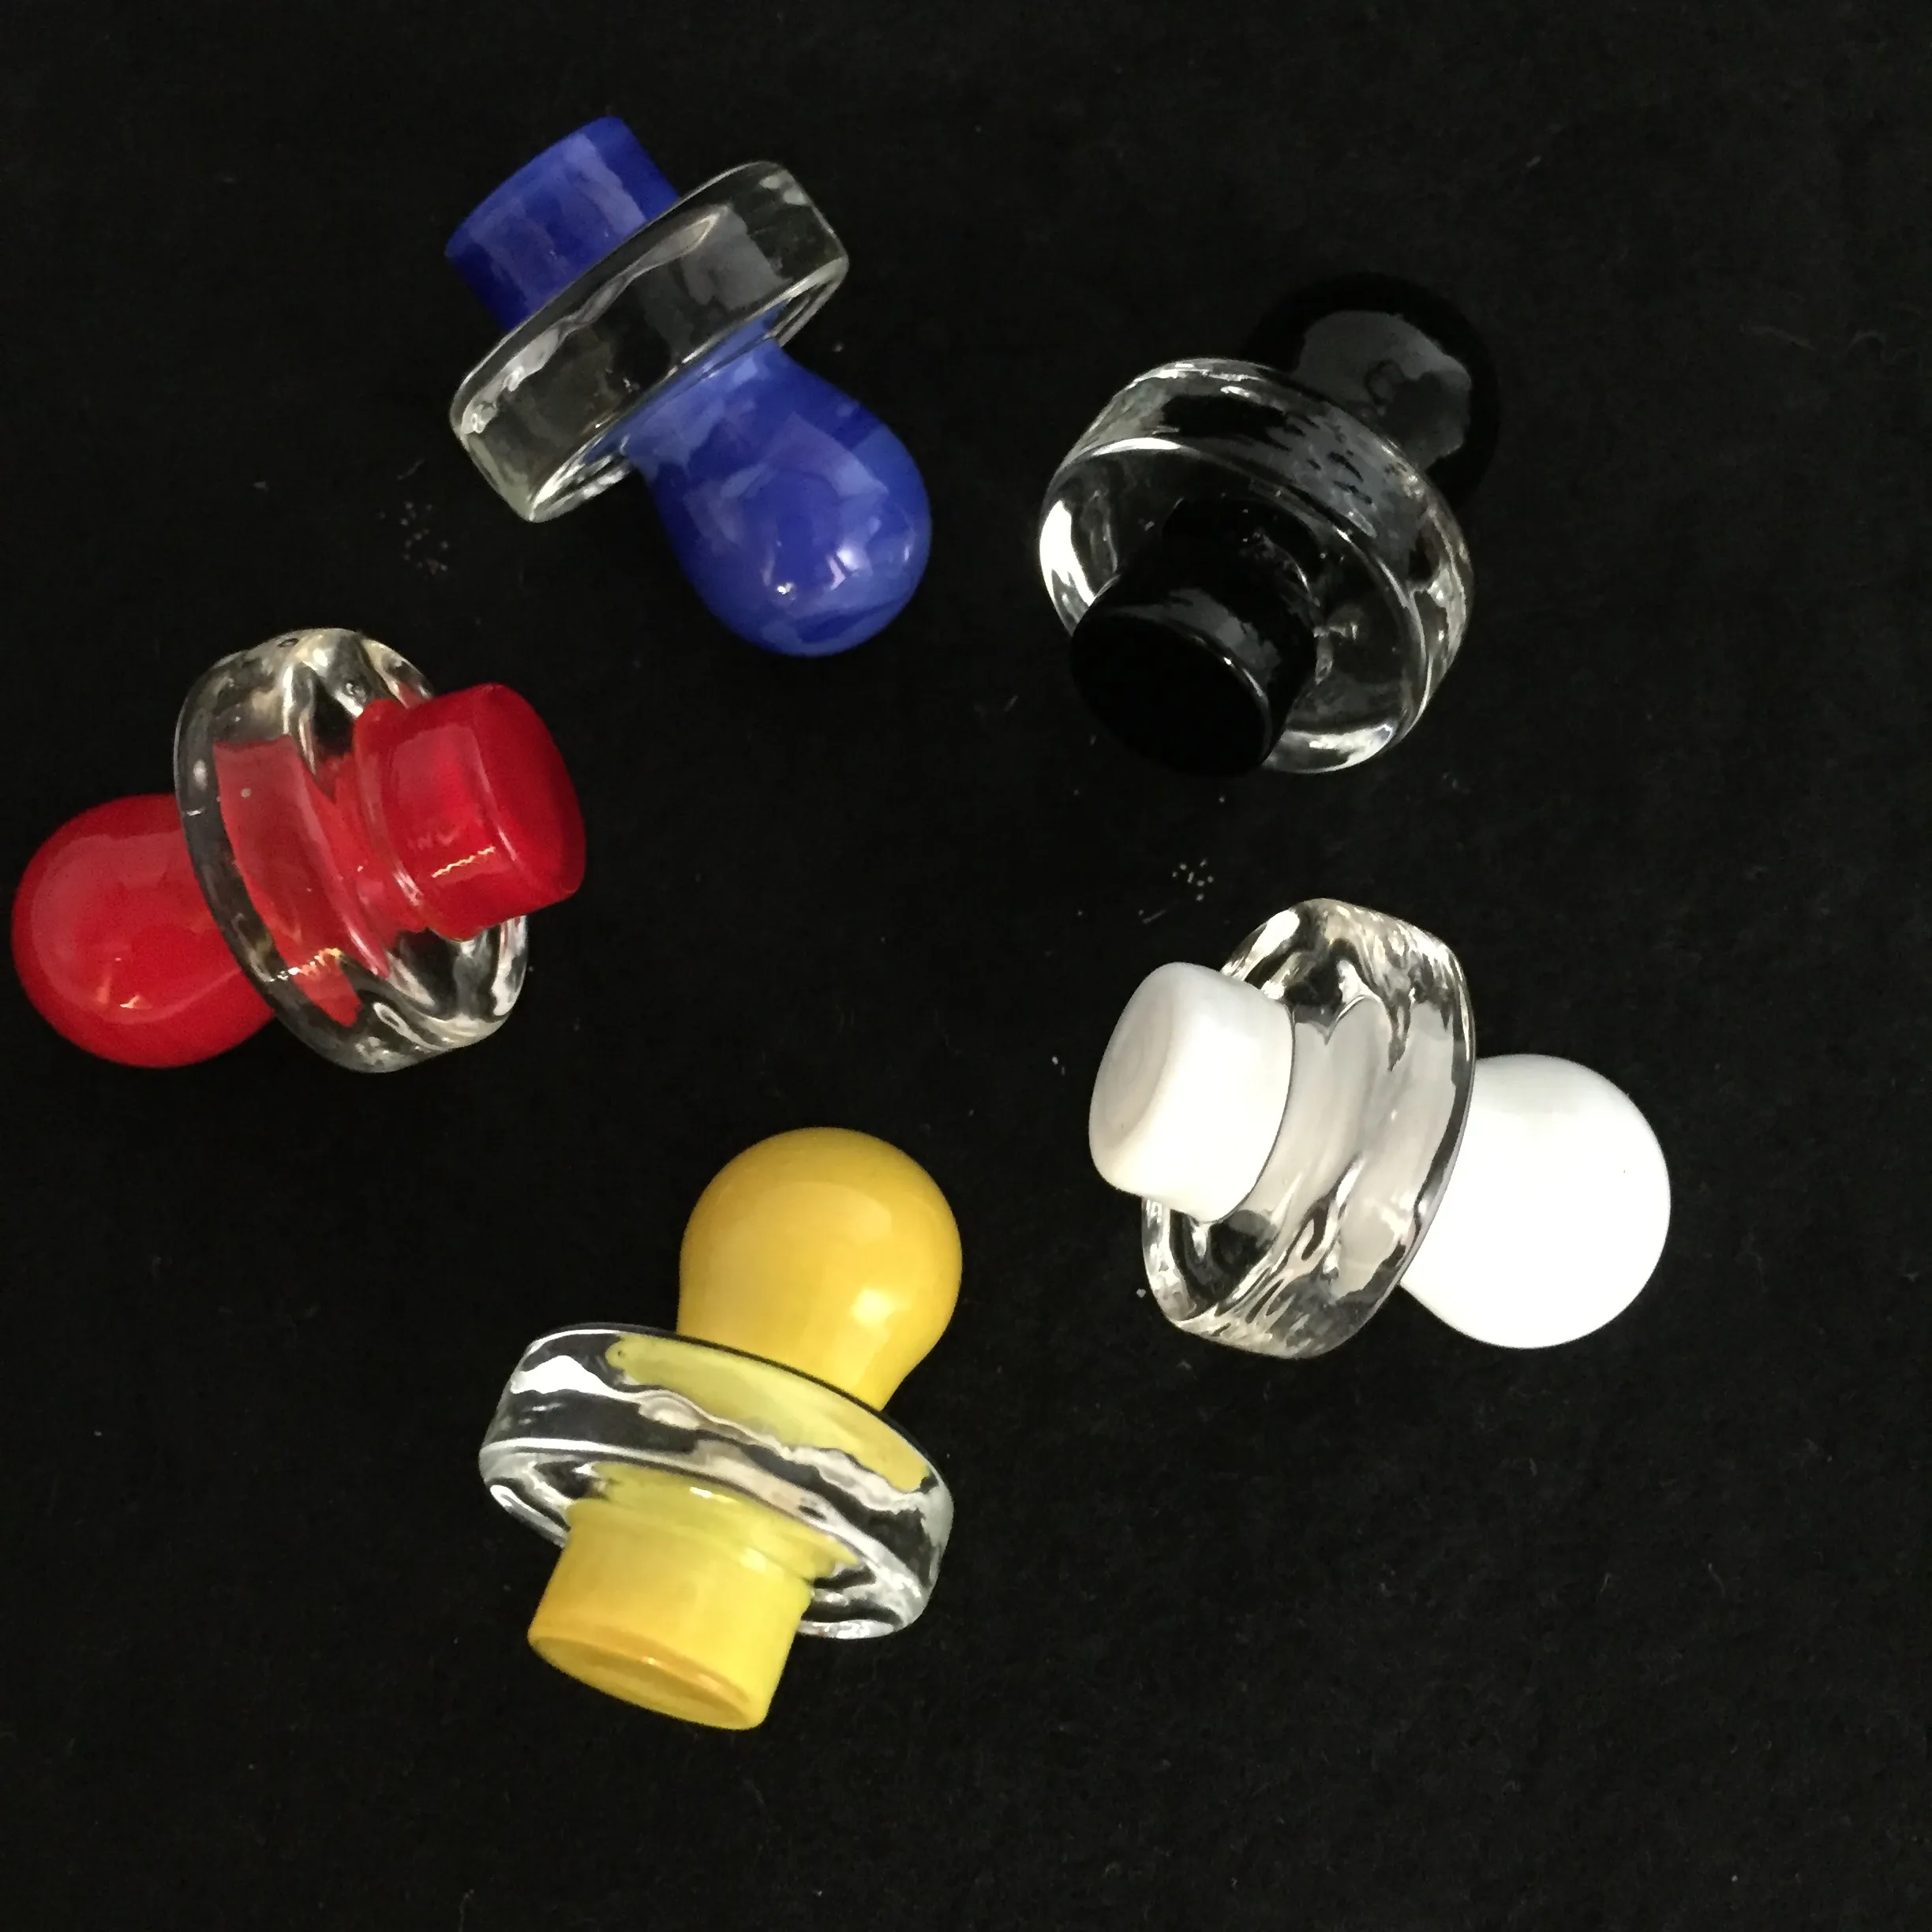 Wholesale Colored Glass UFO Carb Cap Diameter 26mm For Quartz Banger Nail 19.5mm Enail Universal Coil Heating Coils In Stock